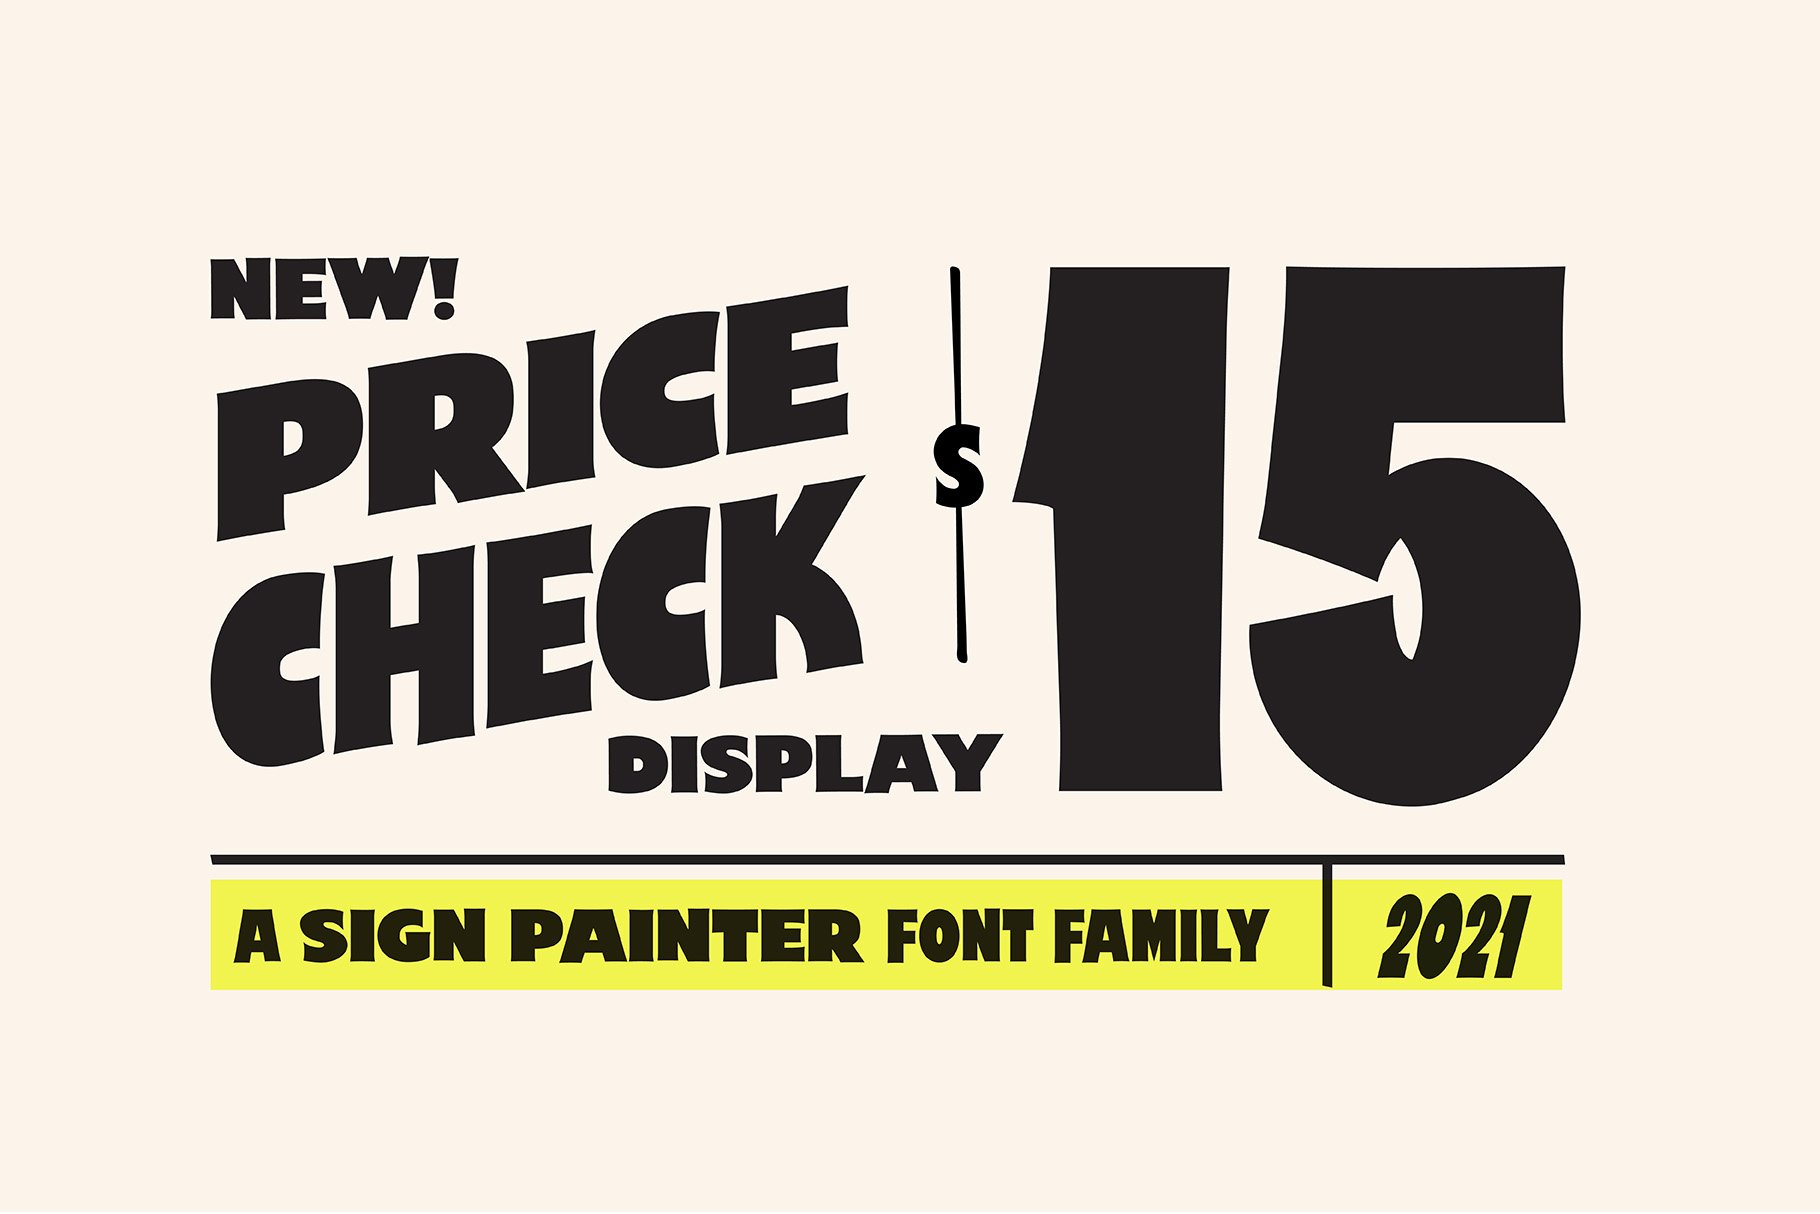 Price Check - A Sign Painter Display cover image.